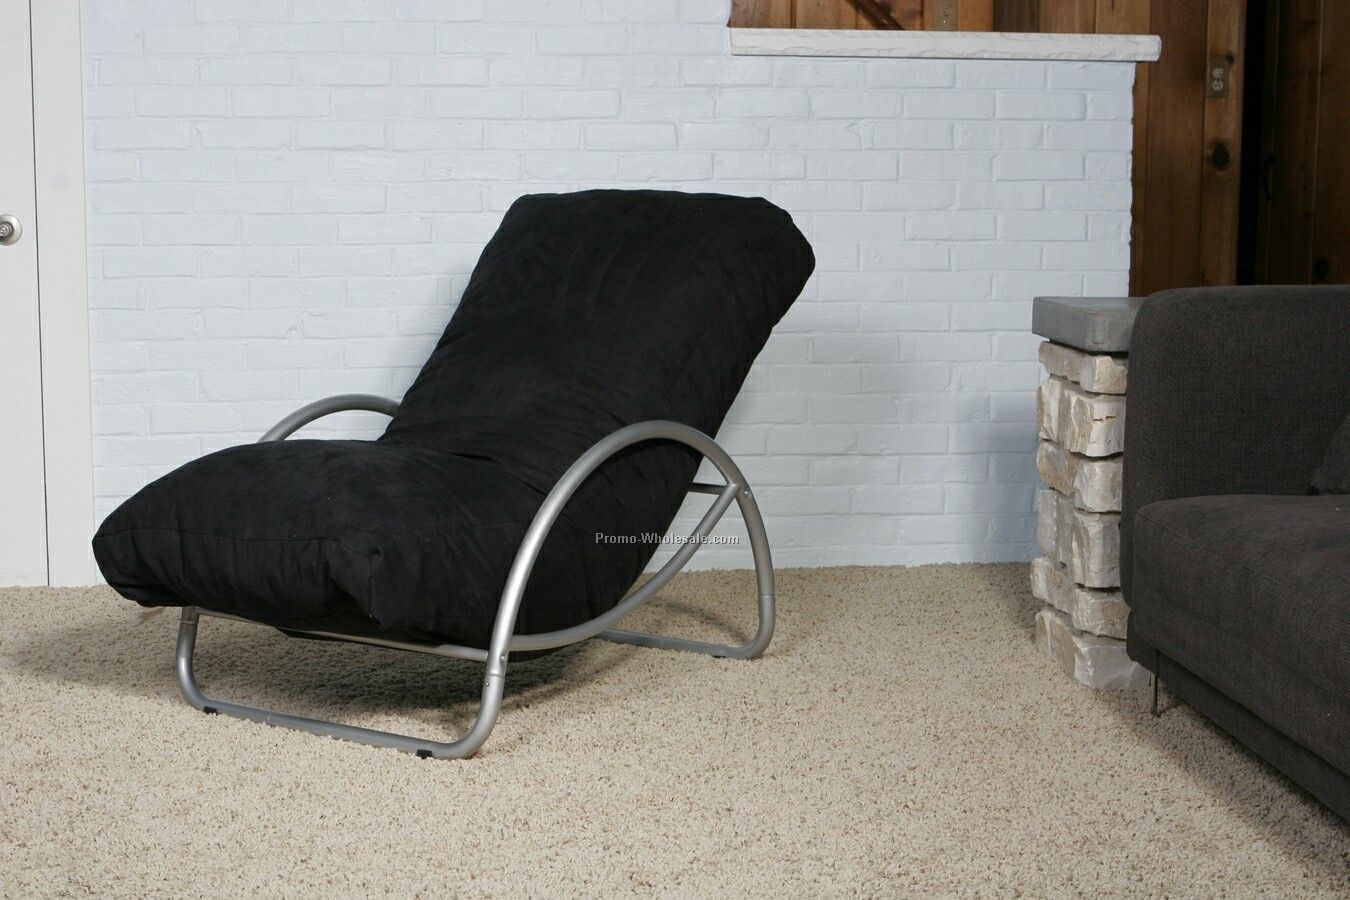 45"x28"x32" Twill Fuf Tempo Chair (Embroidered)